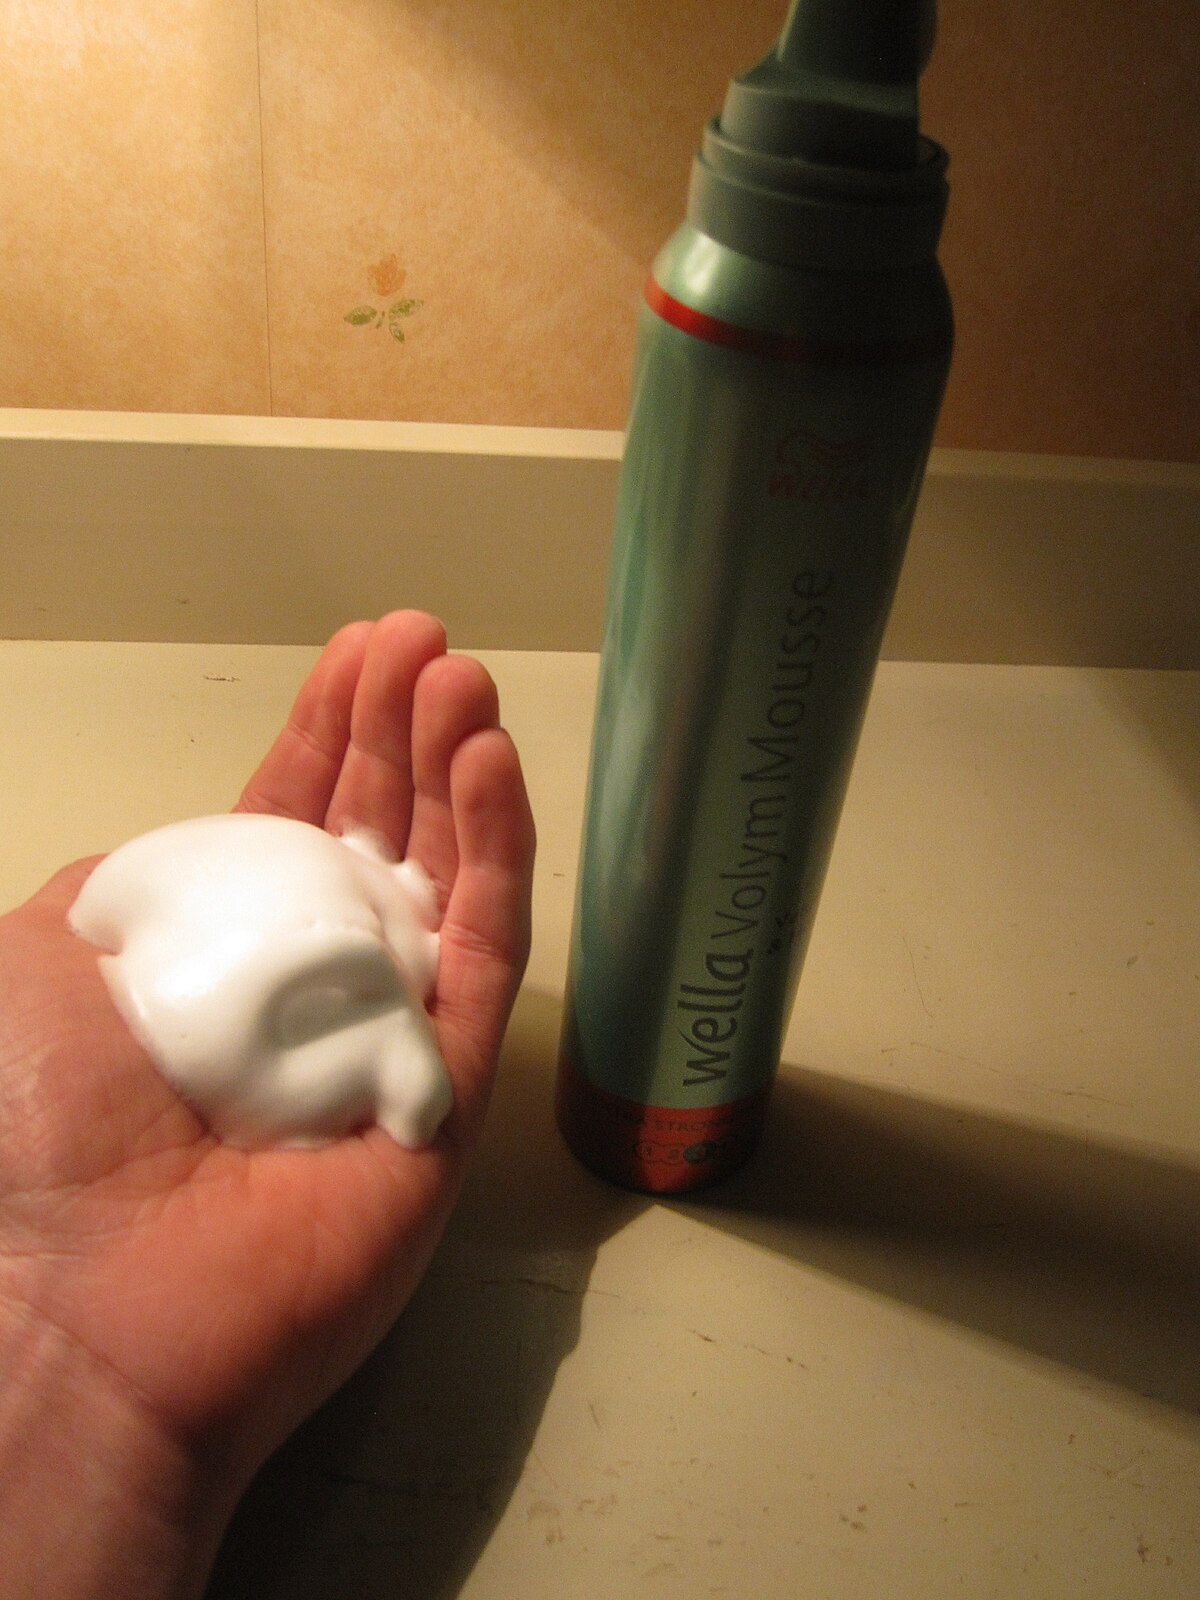 Hair mousse - Wikipedia